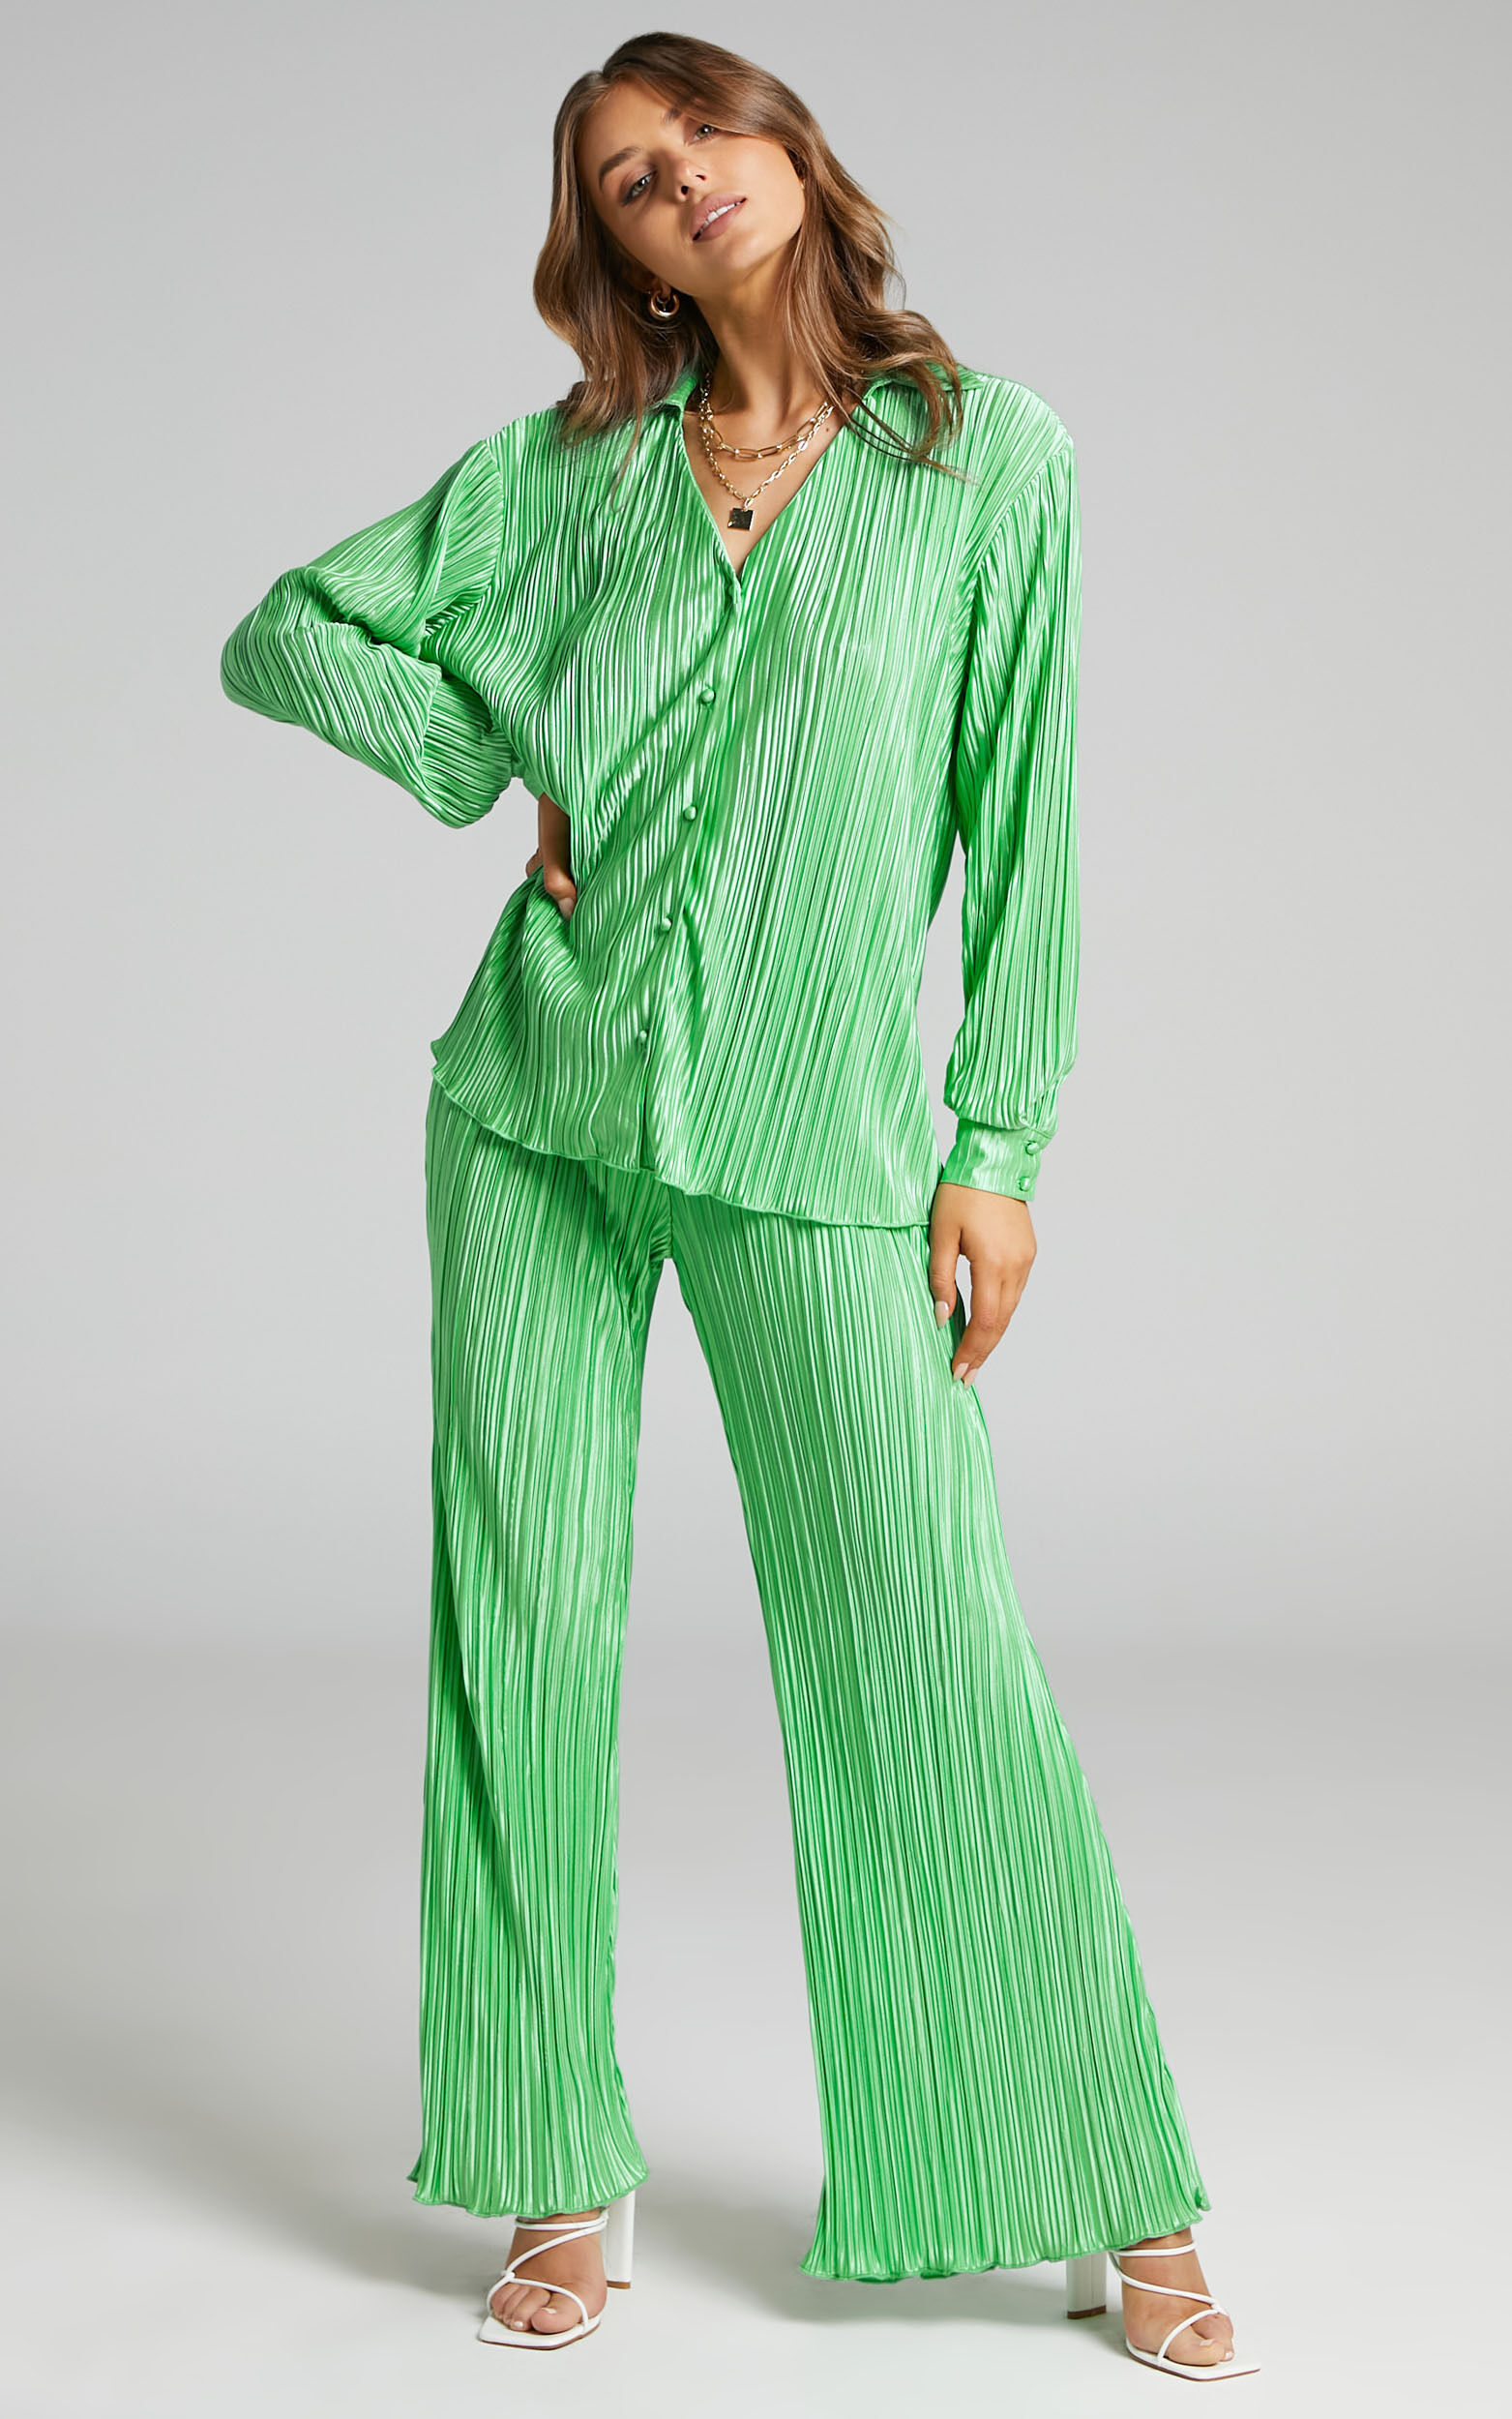 Beca Plisse Button up Shirt in Bright Green - 06, GRN5, super-hi-res image number null